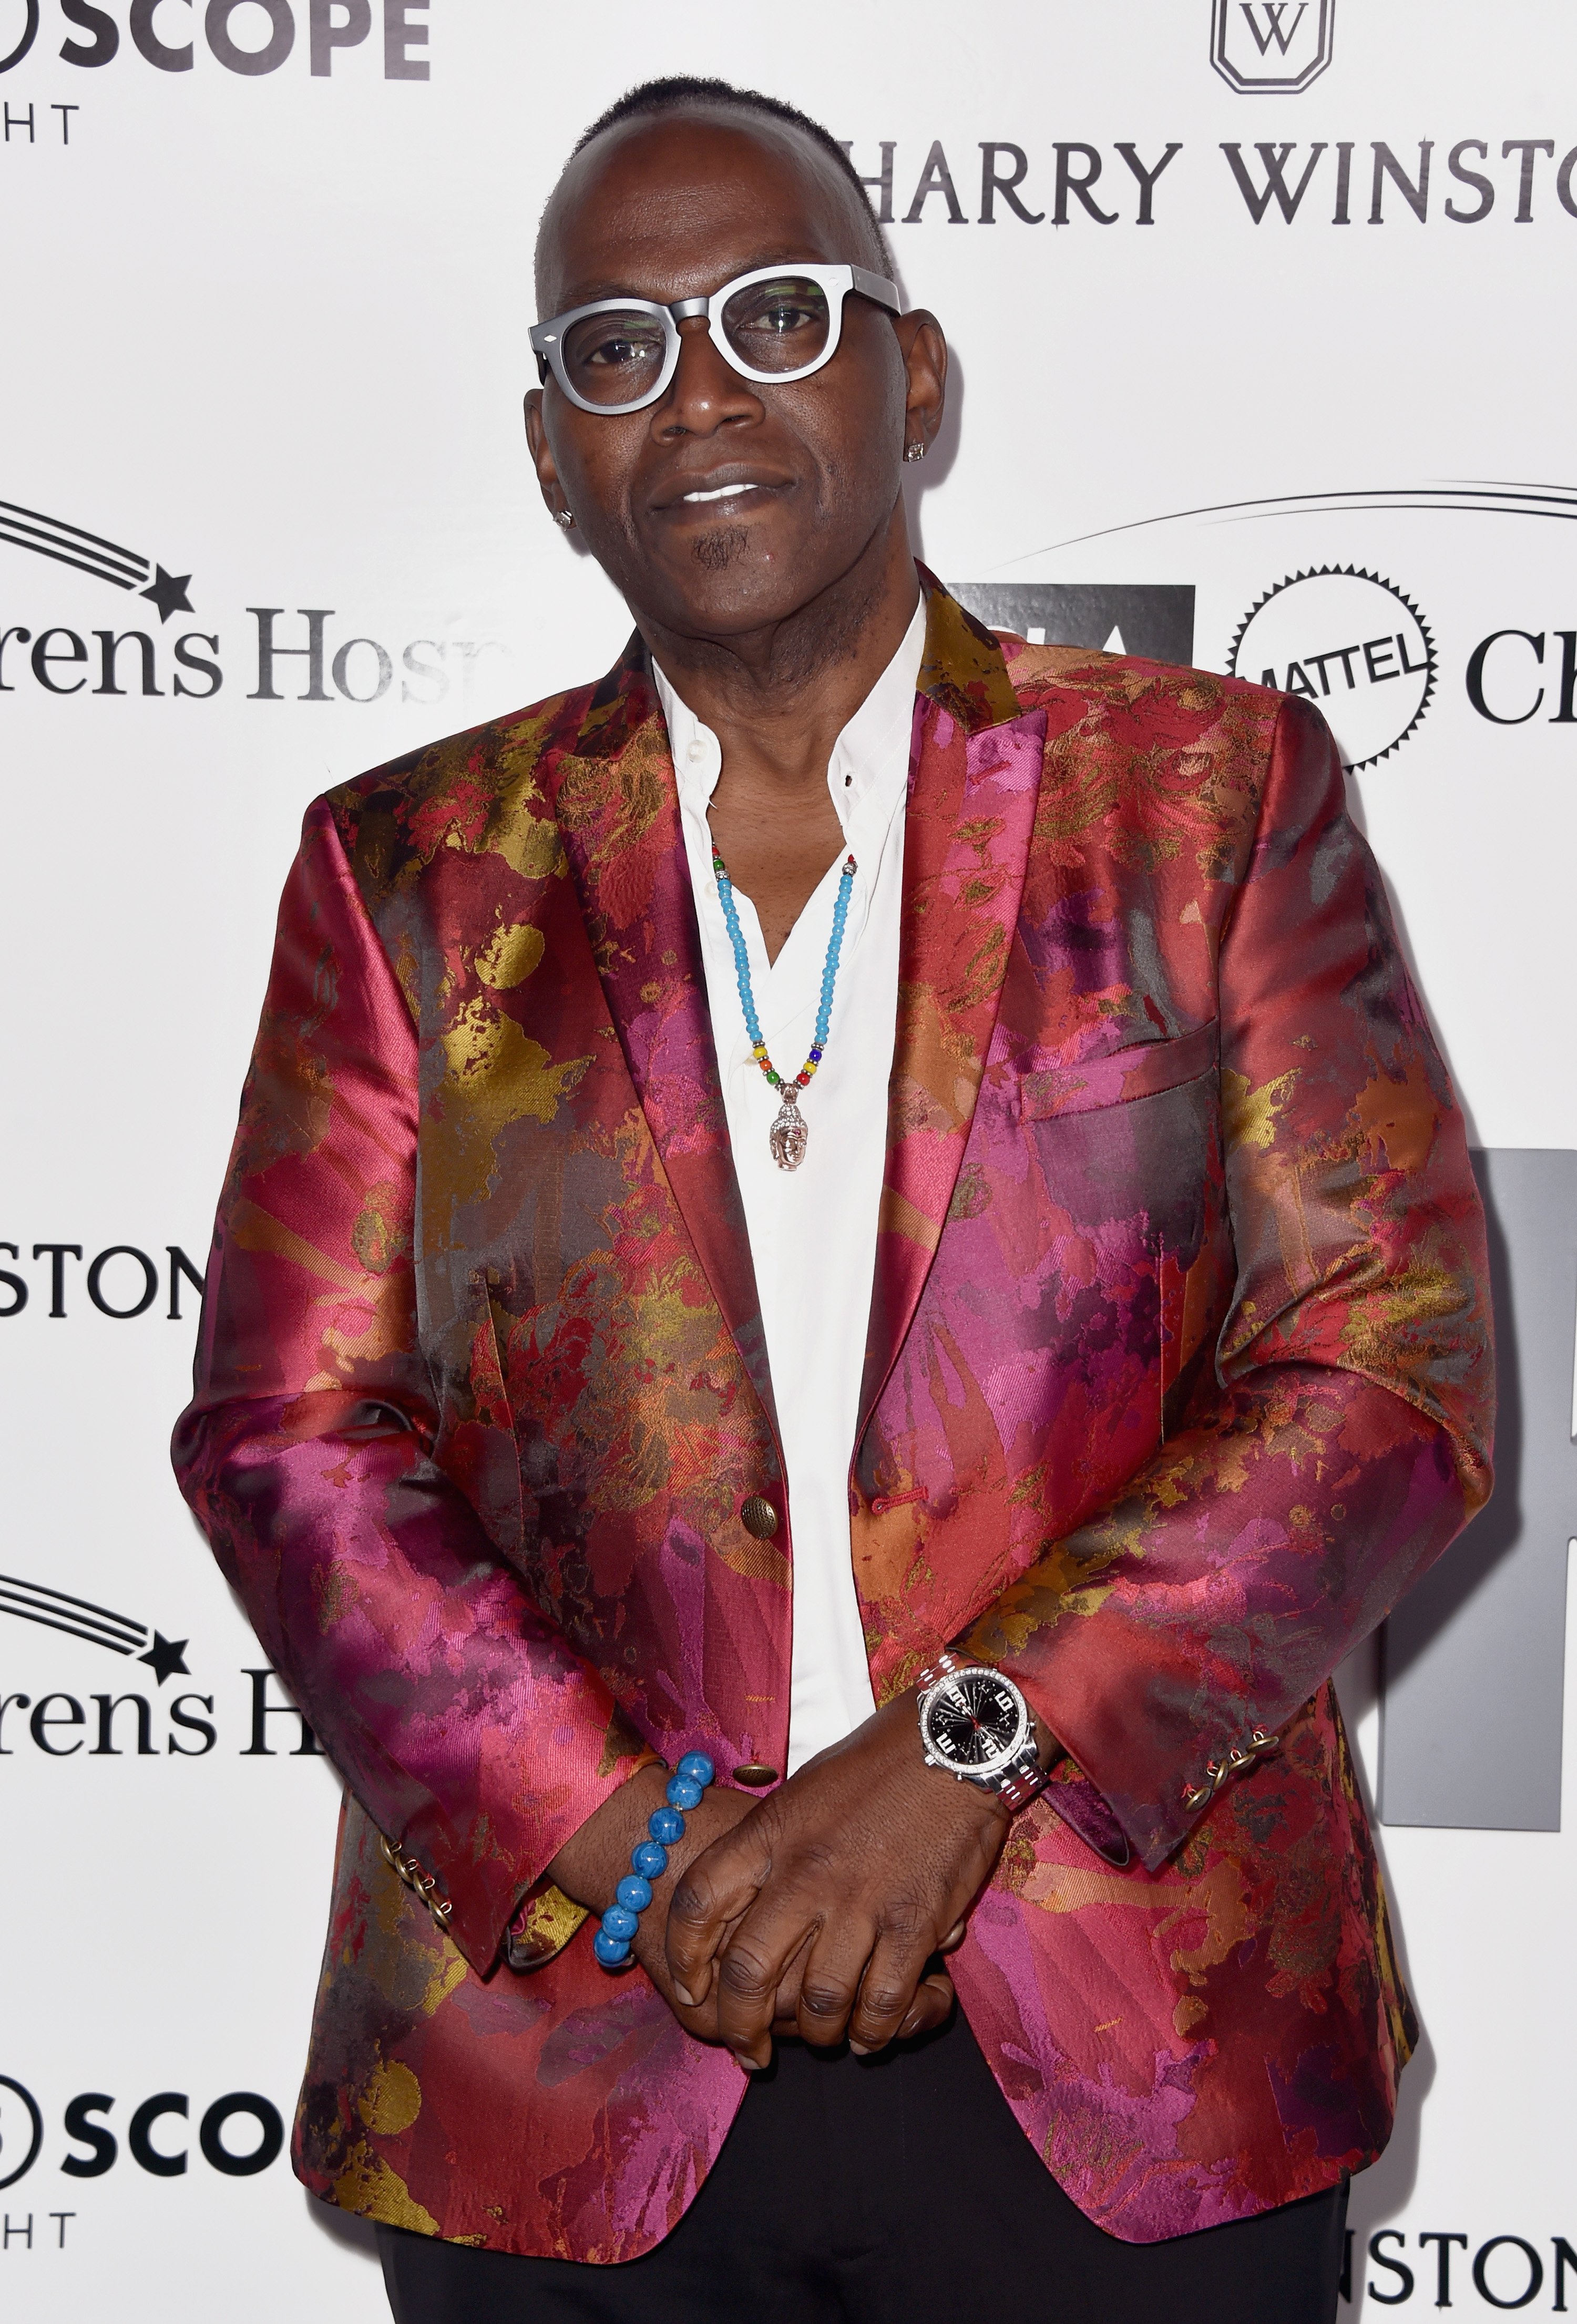 Randy Jackson arrives at the UCLA Mattel Children's Hospital on May 6, 2017 in Culver City, California | Photo: Getty Images